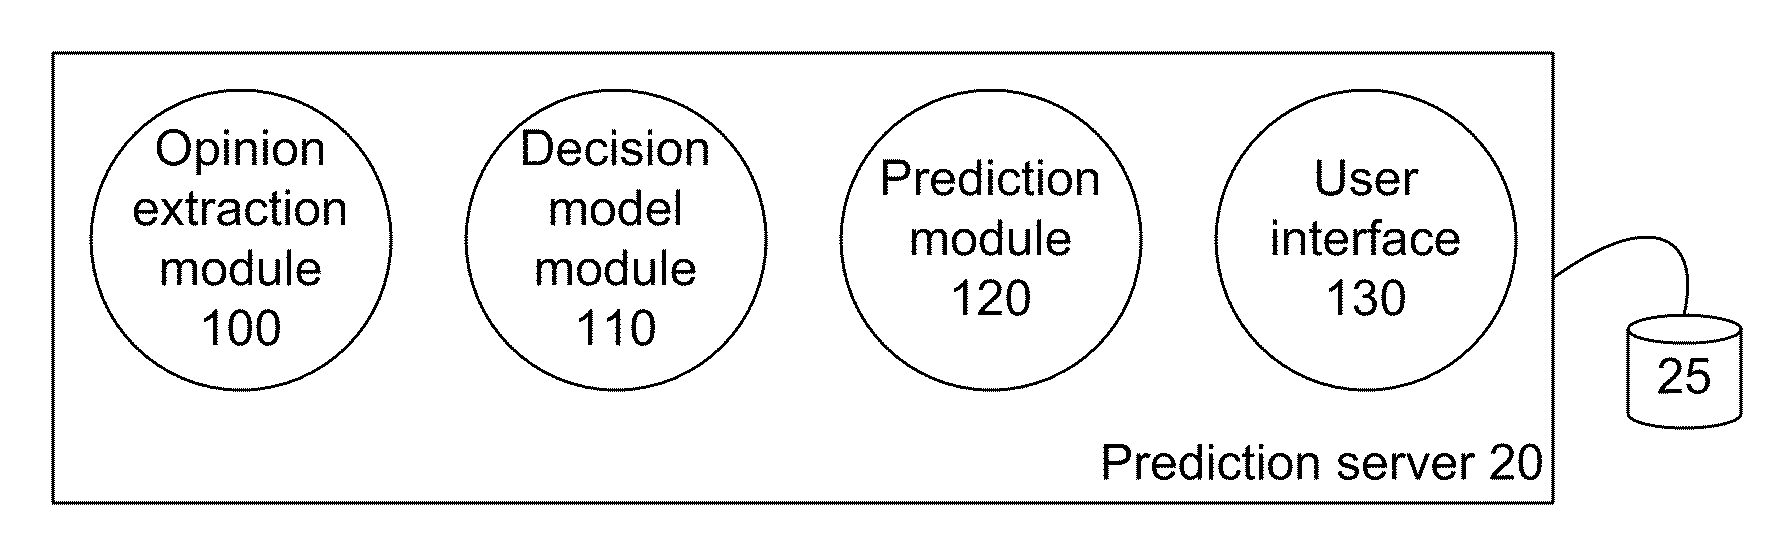 System and Method for Automatically Predicting the Outcome of Expert Forecasts